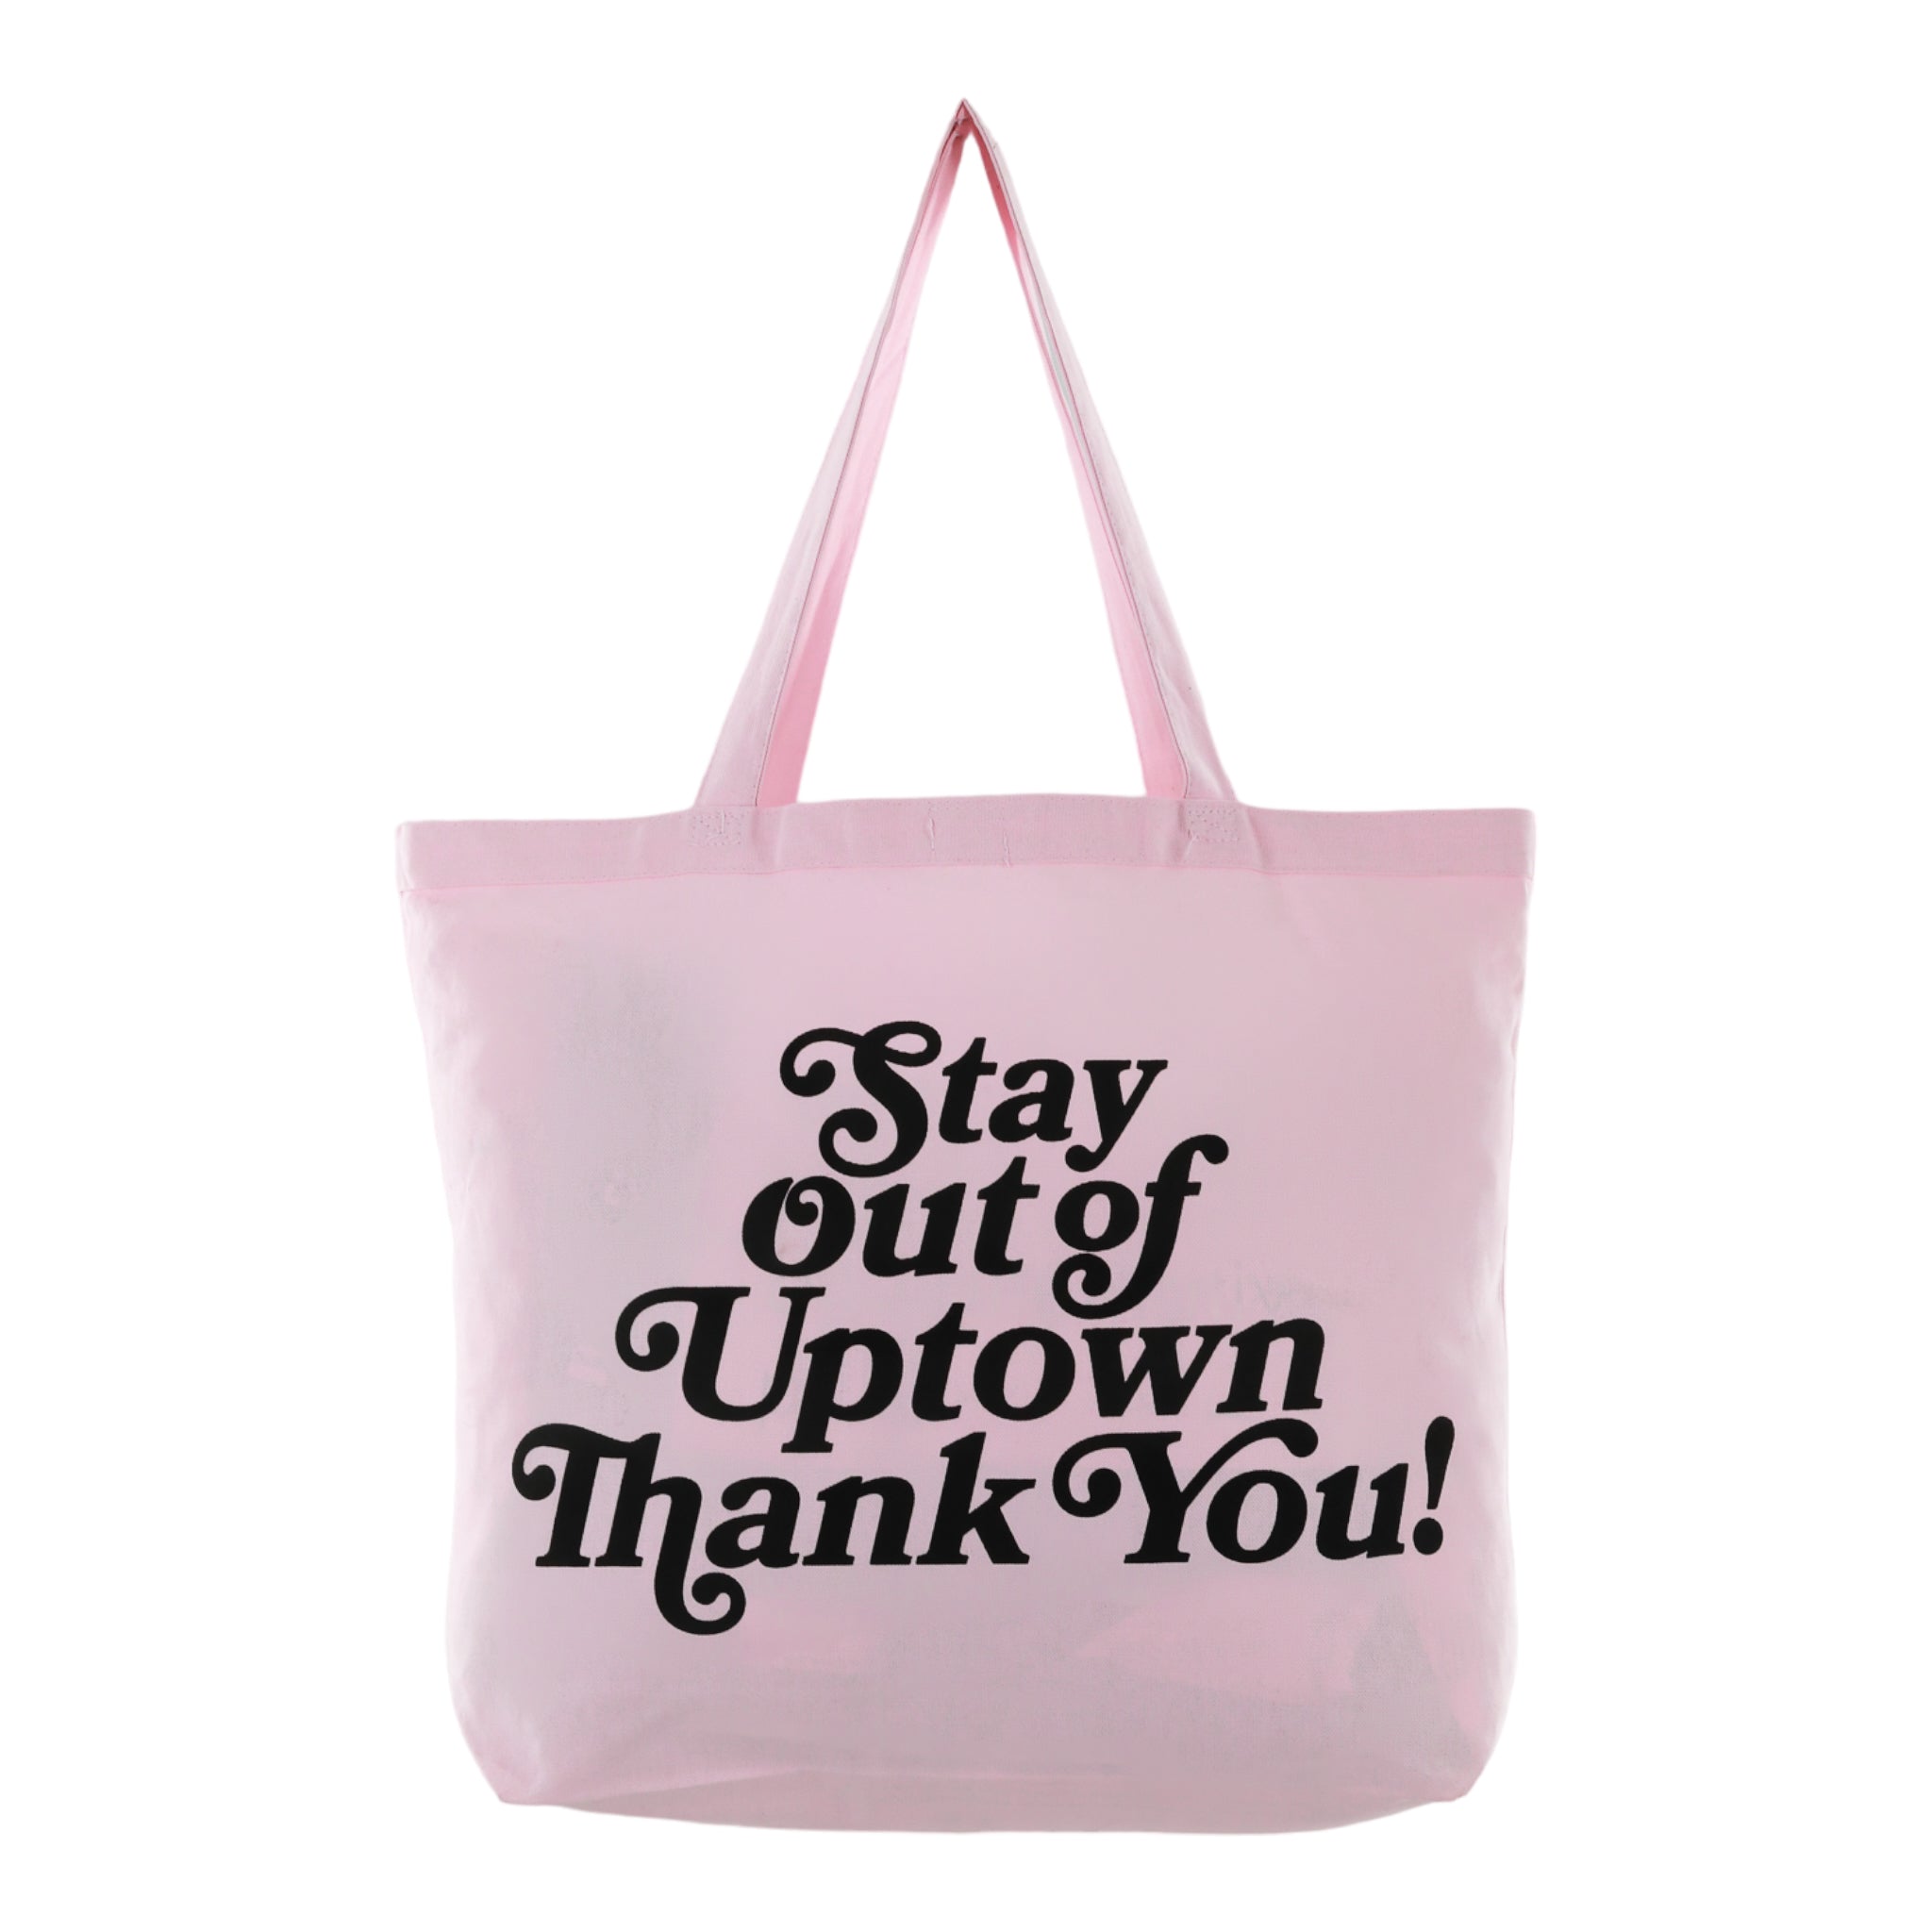 Stay Out of Uptown - Soft Pink Canvas Tote Bag